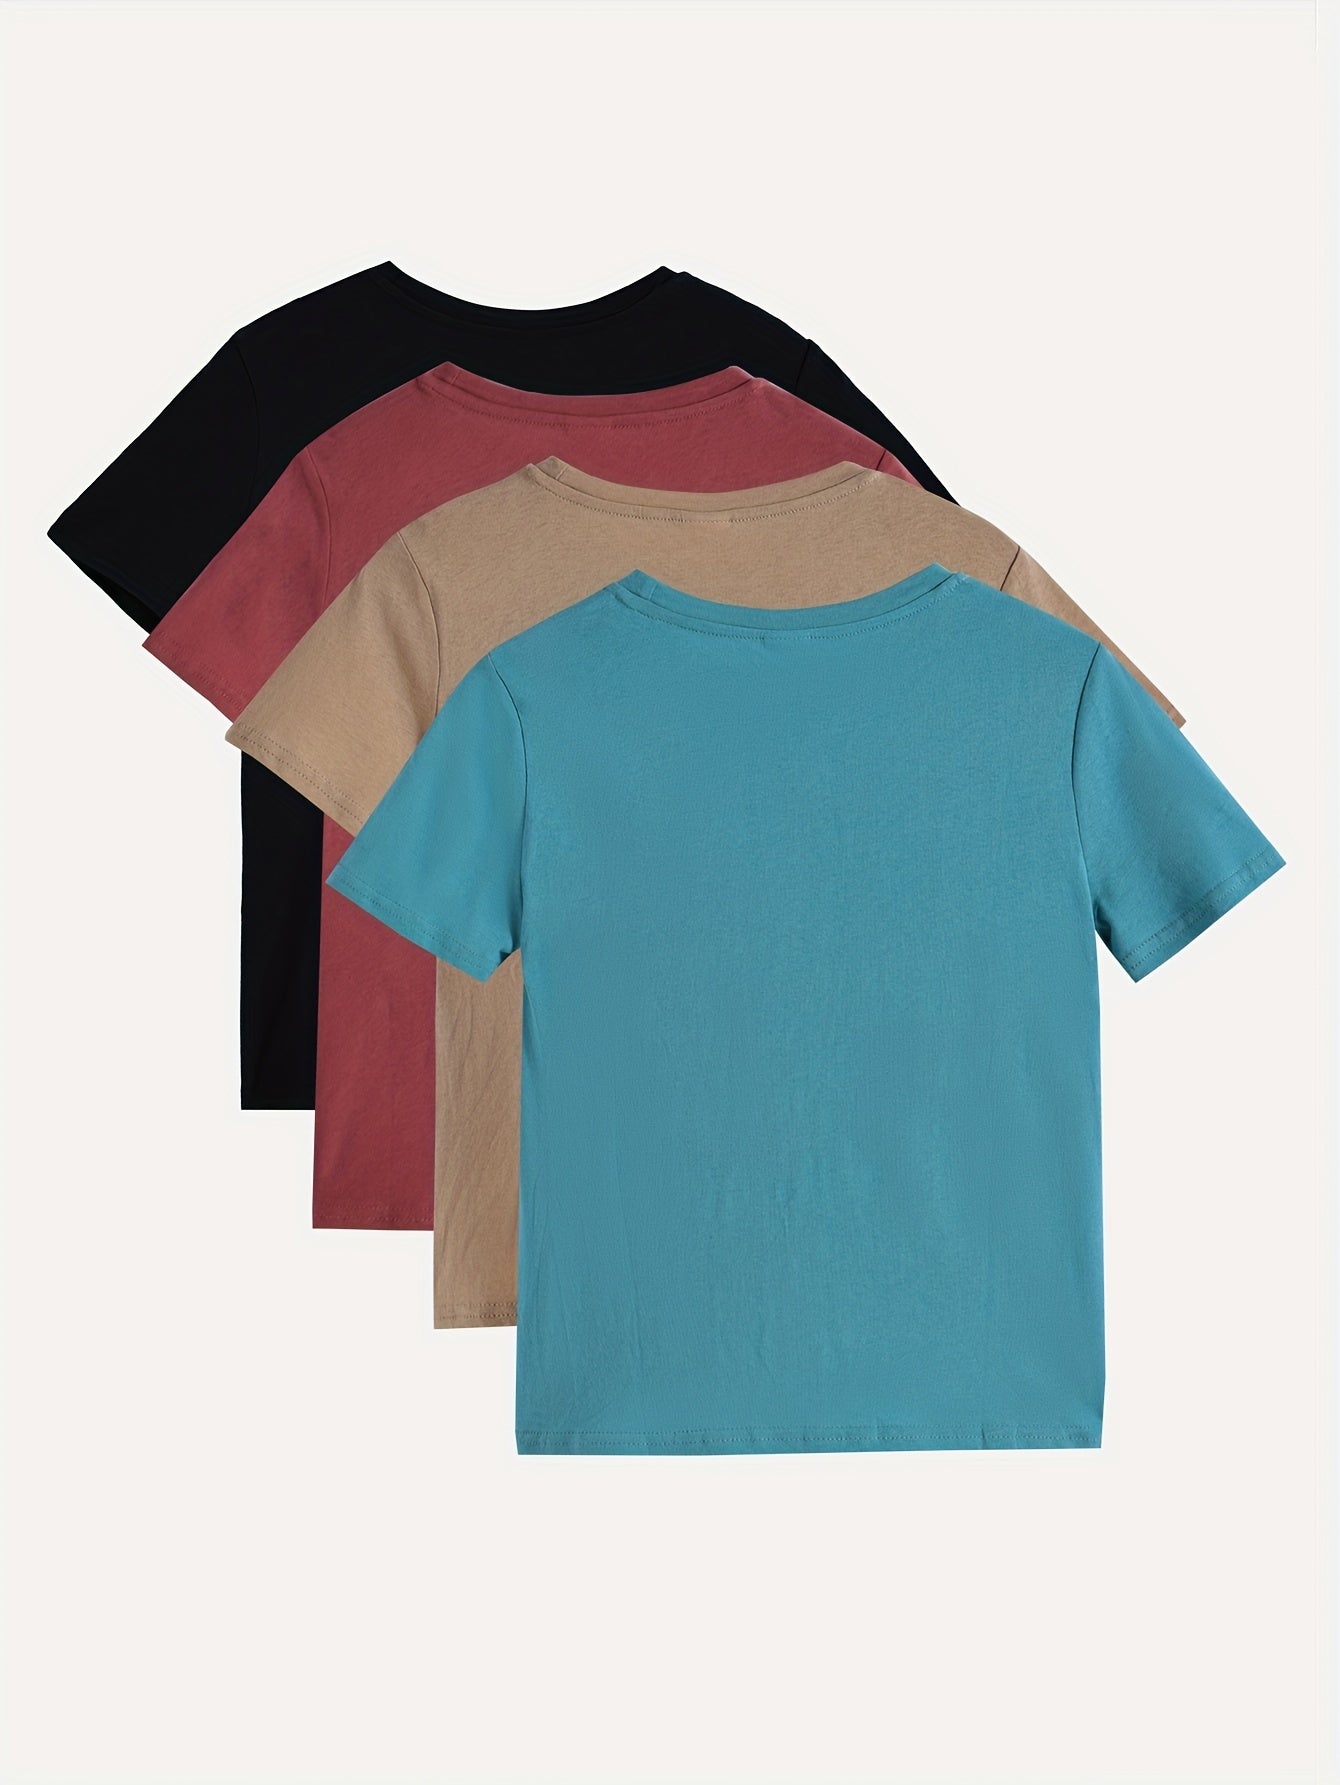 4pcs Solid Thin T-Shirts For Boys - Cool, Lightweight And Comfy Summer Clothes!